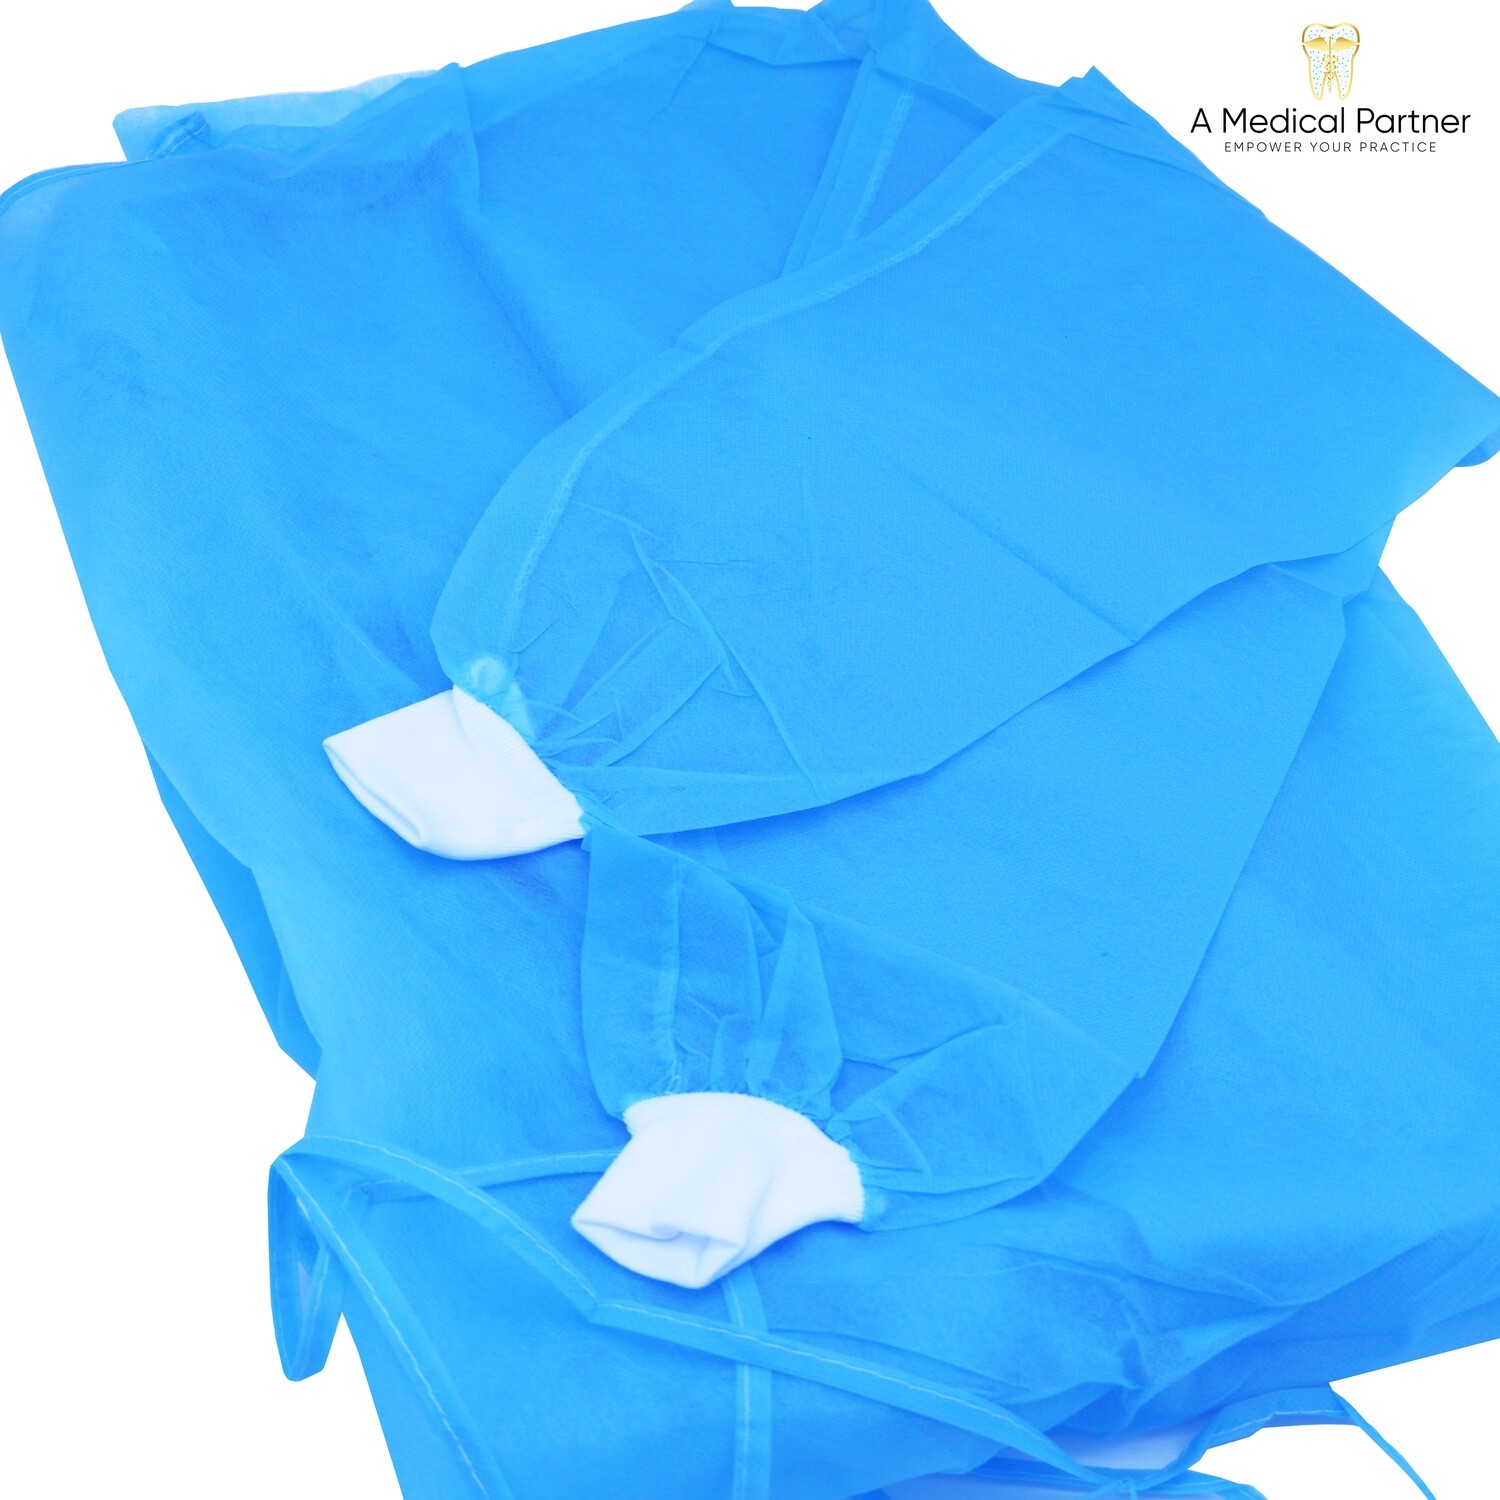 10 X 32G Knitted White Cuff Blue Disposable Isolation Gowns - Box of 100 Gowns - $89 PER CASE OF 100